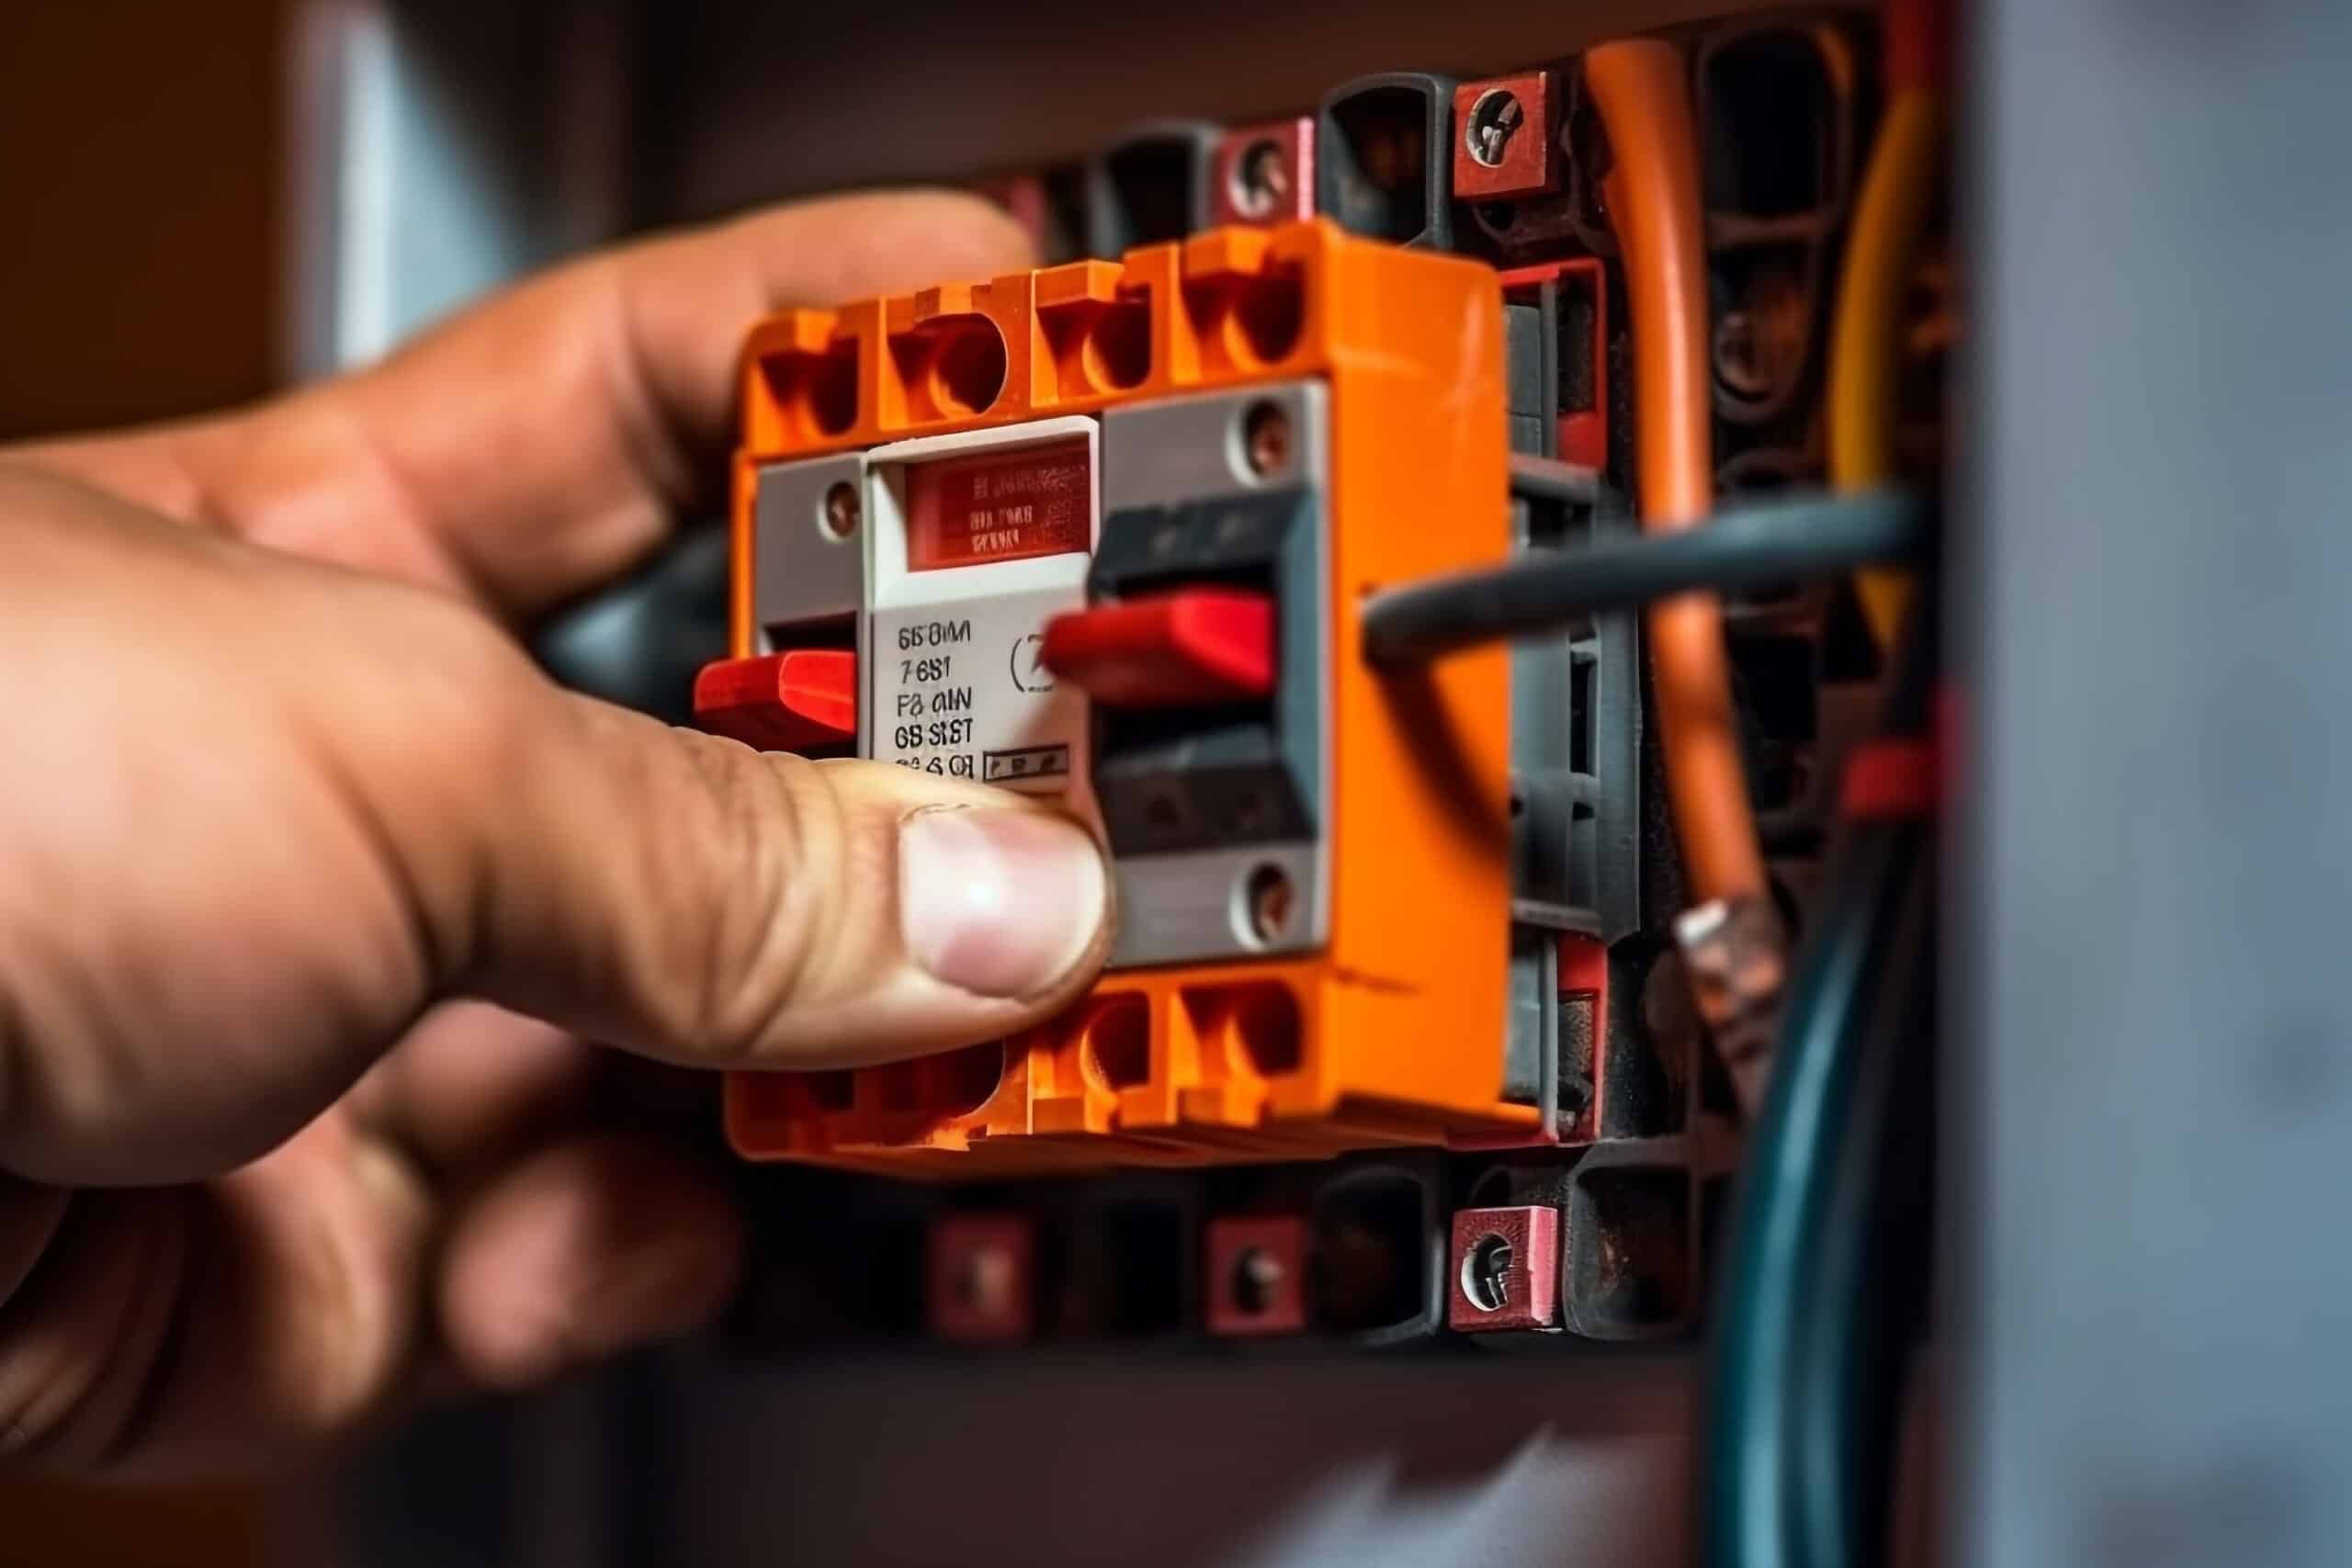 www.appr.com : How to install a transfer switch for a home generator?